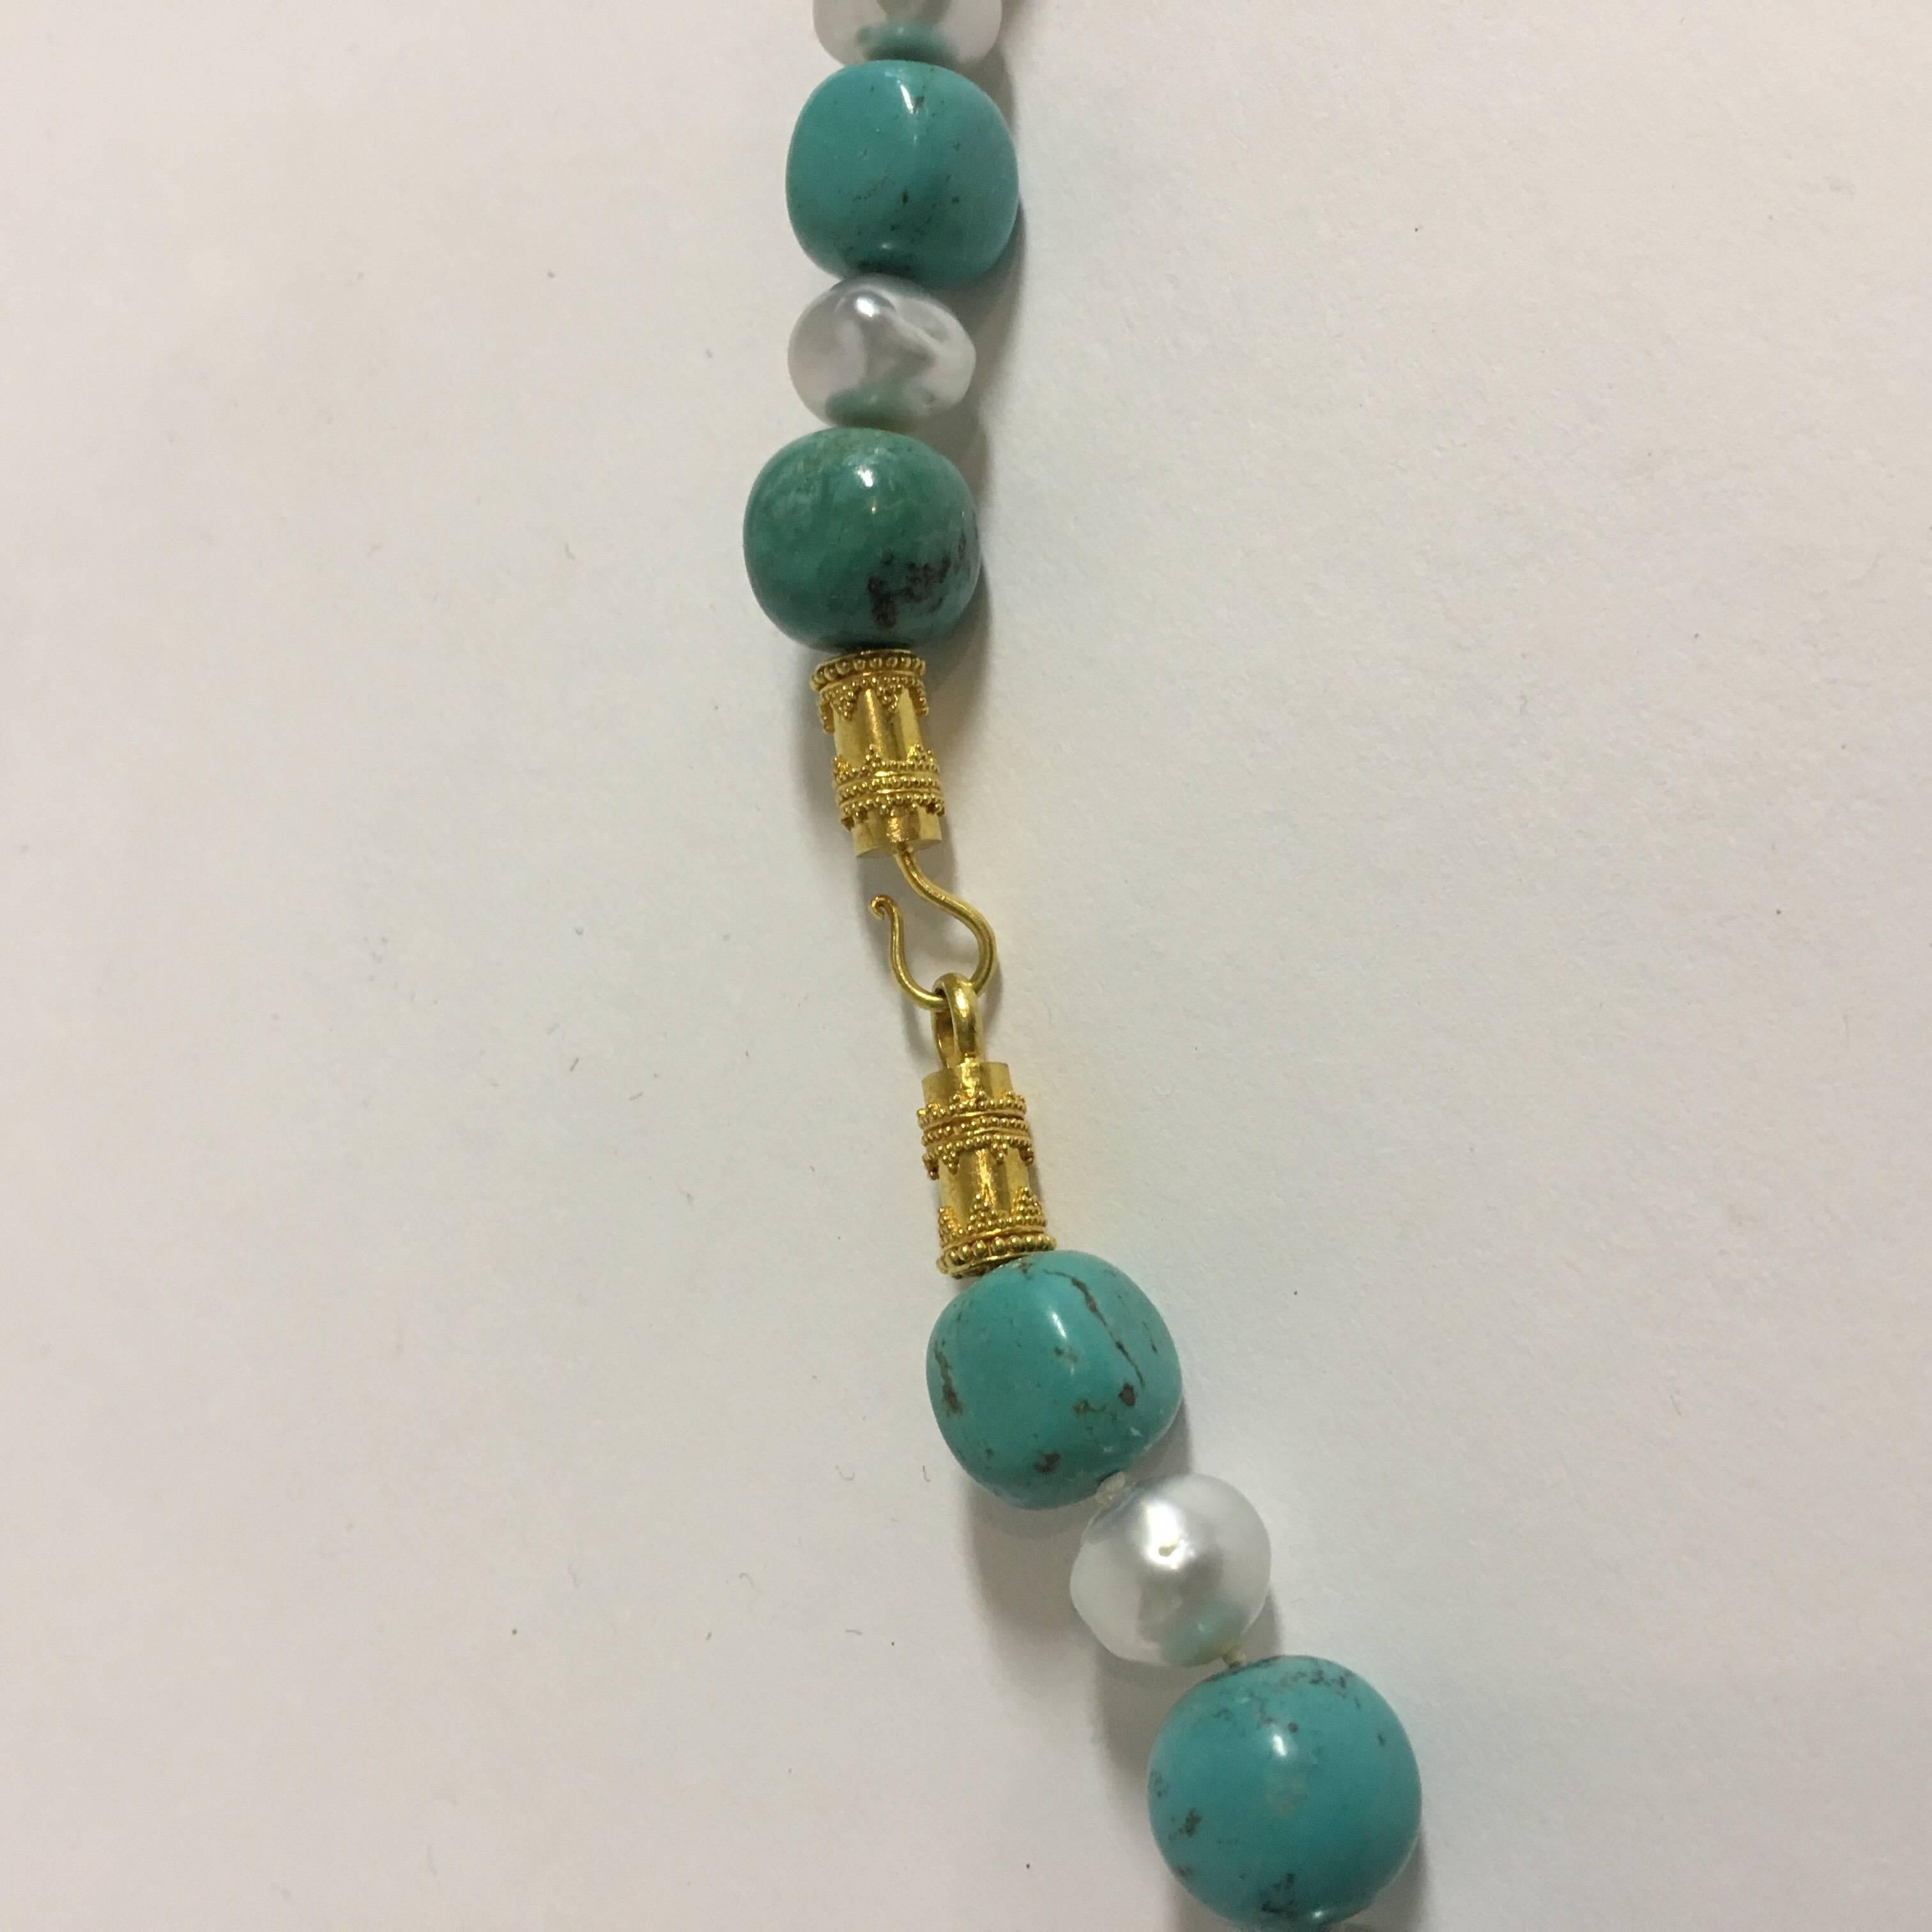 Contemporary Tibetan Turquoise and South Sea Pearl Necklace